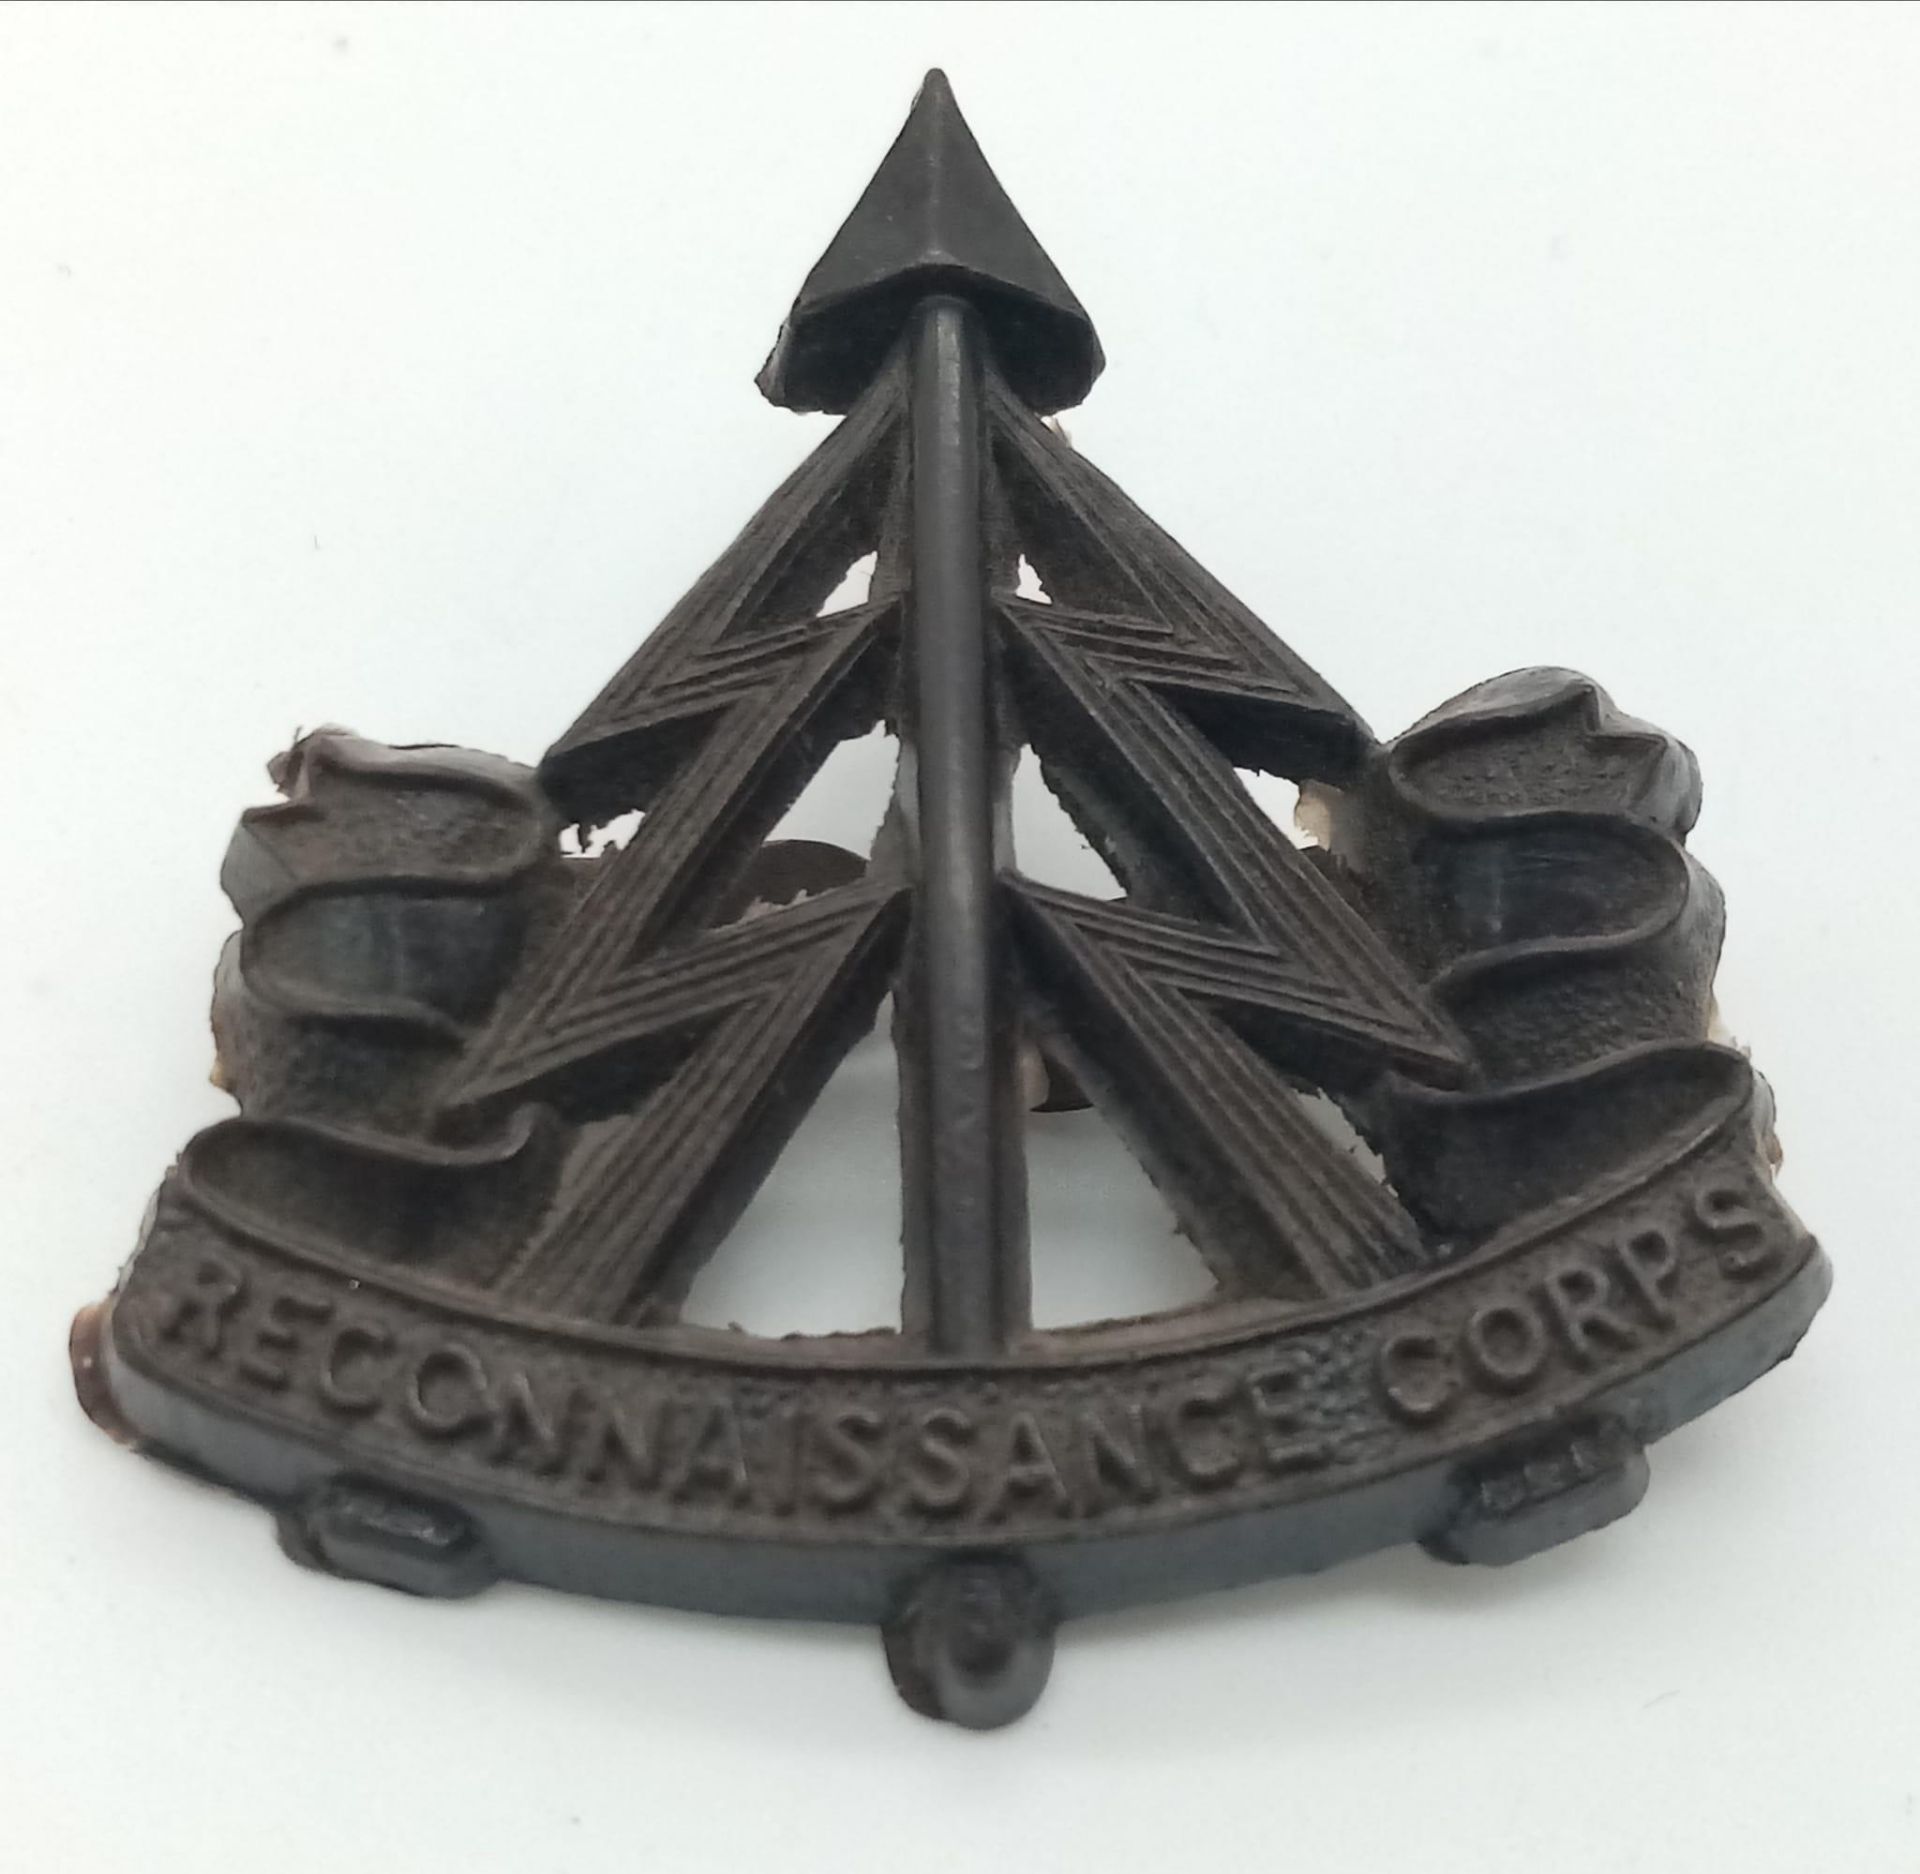 WW2 Economy Issue Plastic Cap Badge The Reconnaissance Corps. Makers Marked: A. Stanley & Sons